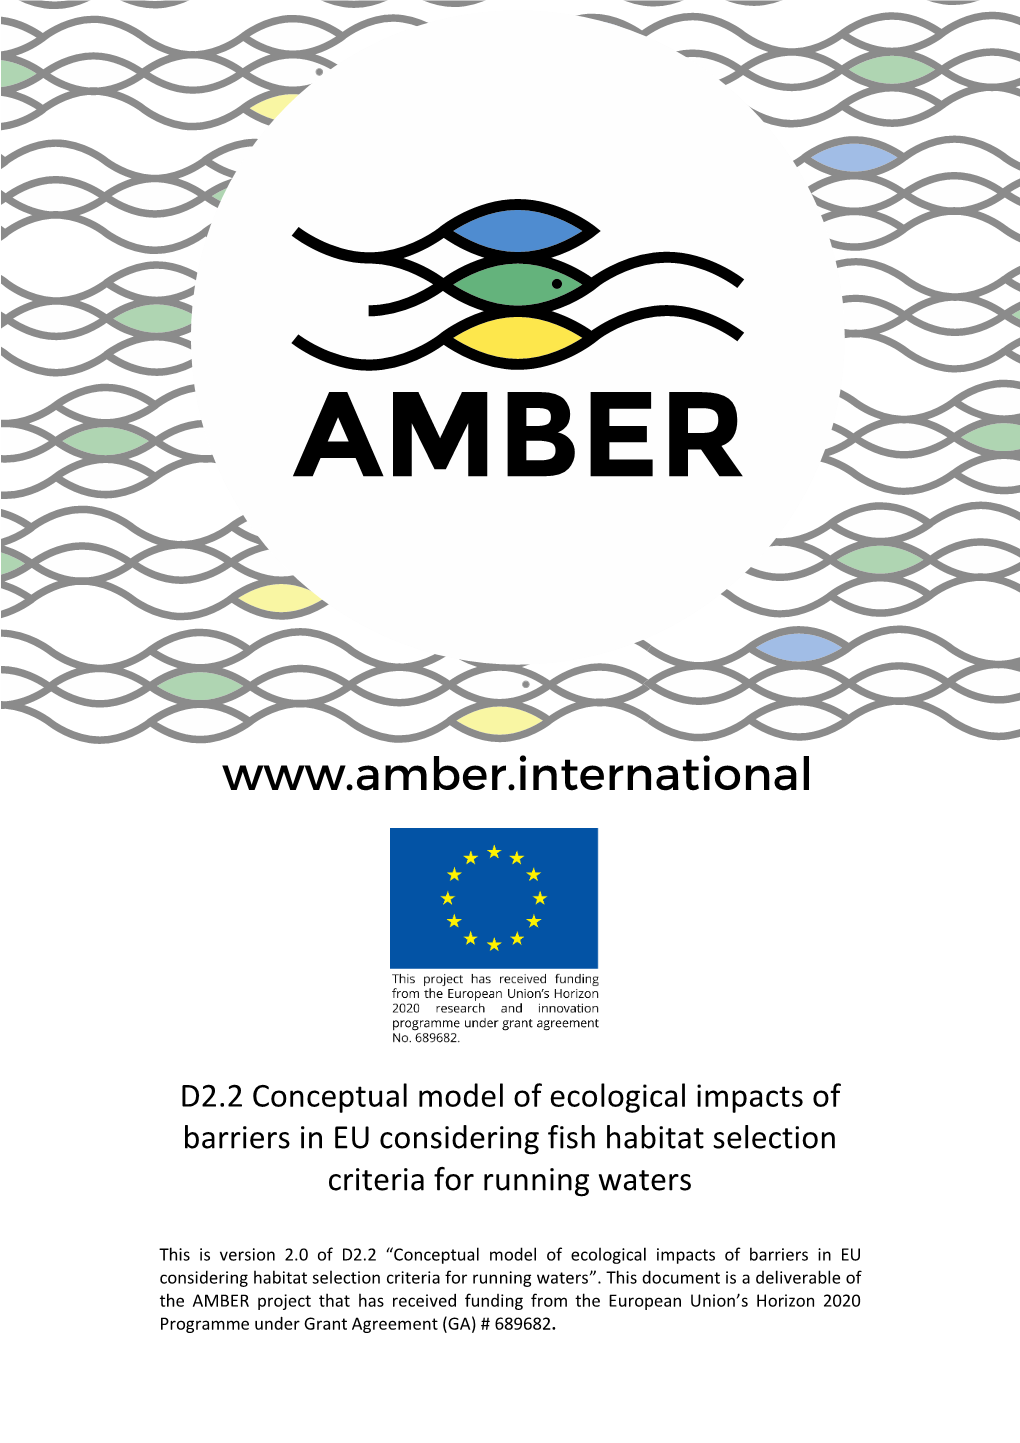 D2.2 Conceptual Model of Ecological Impacts of Barriers in EU